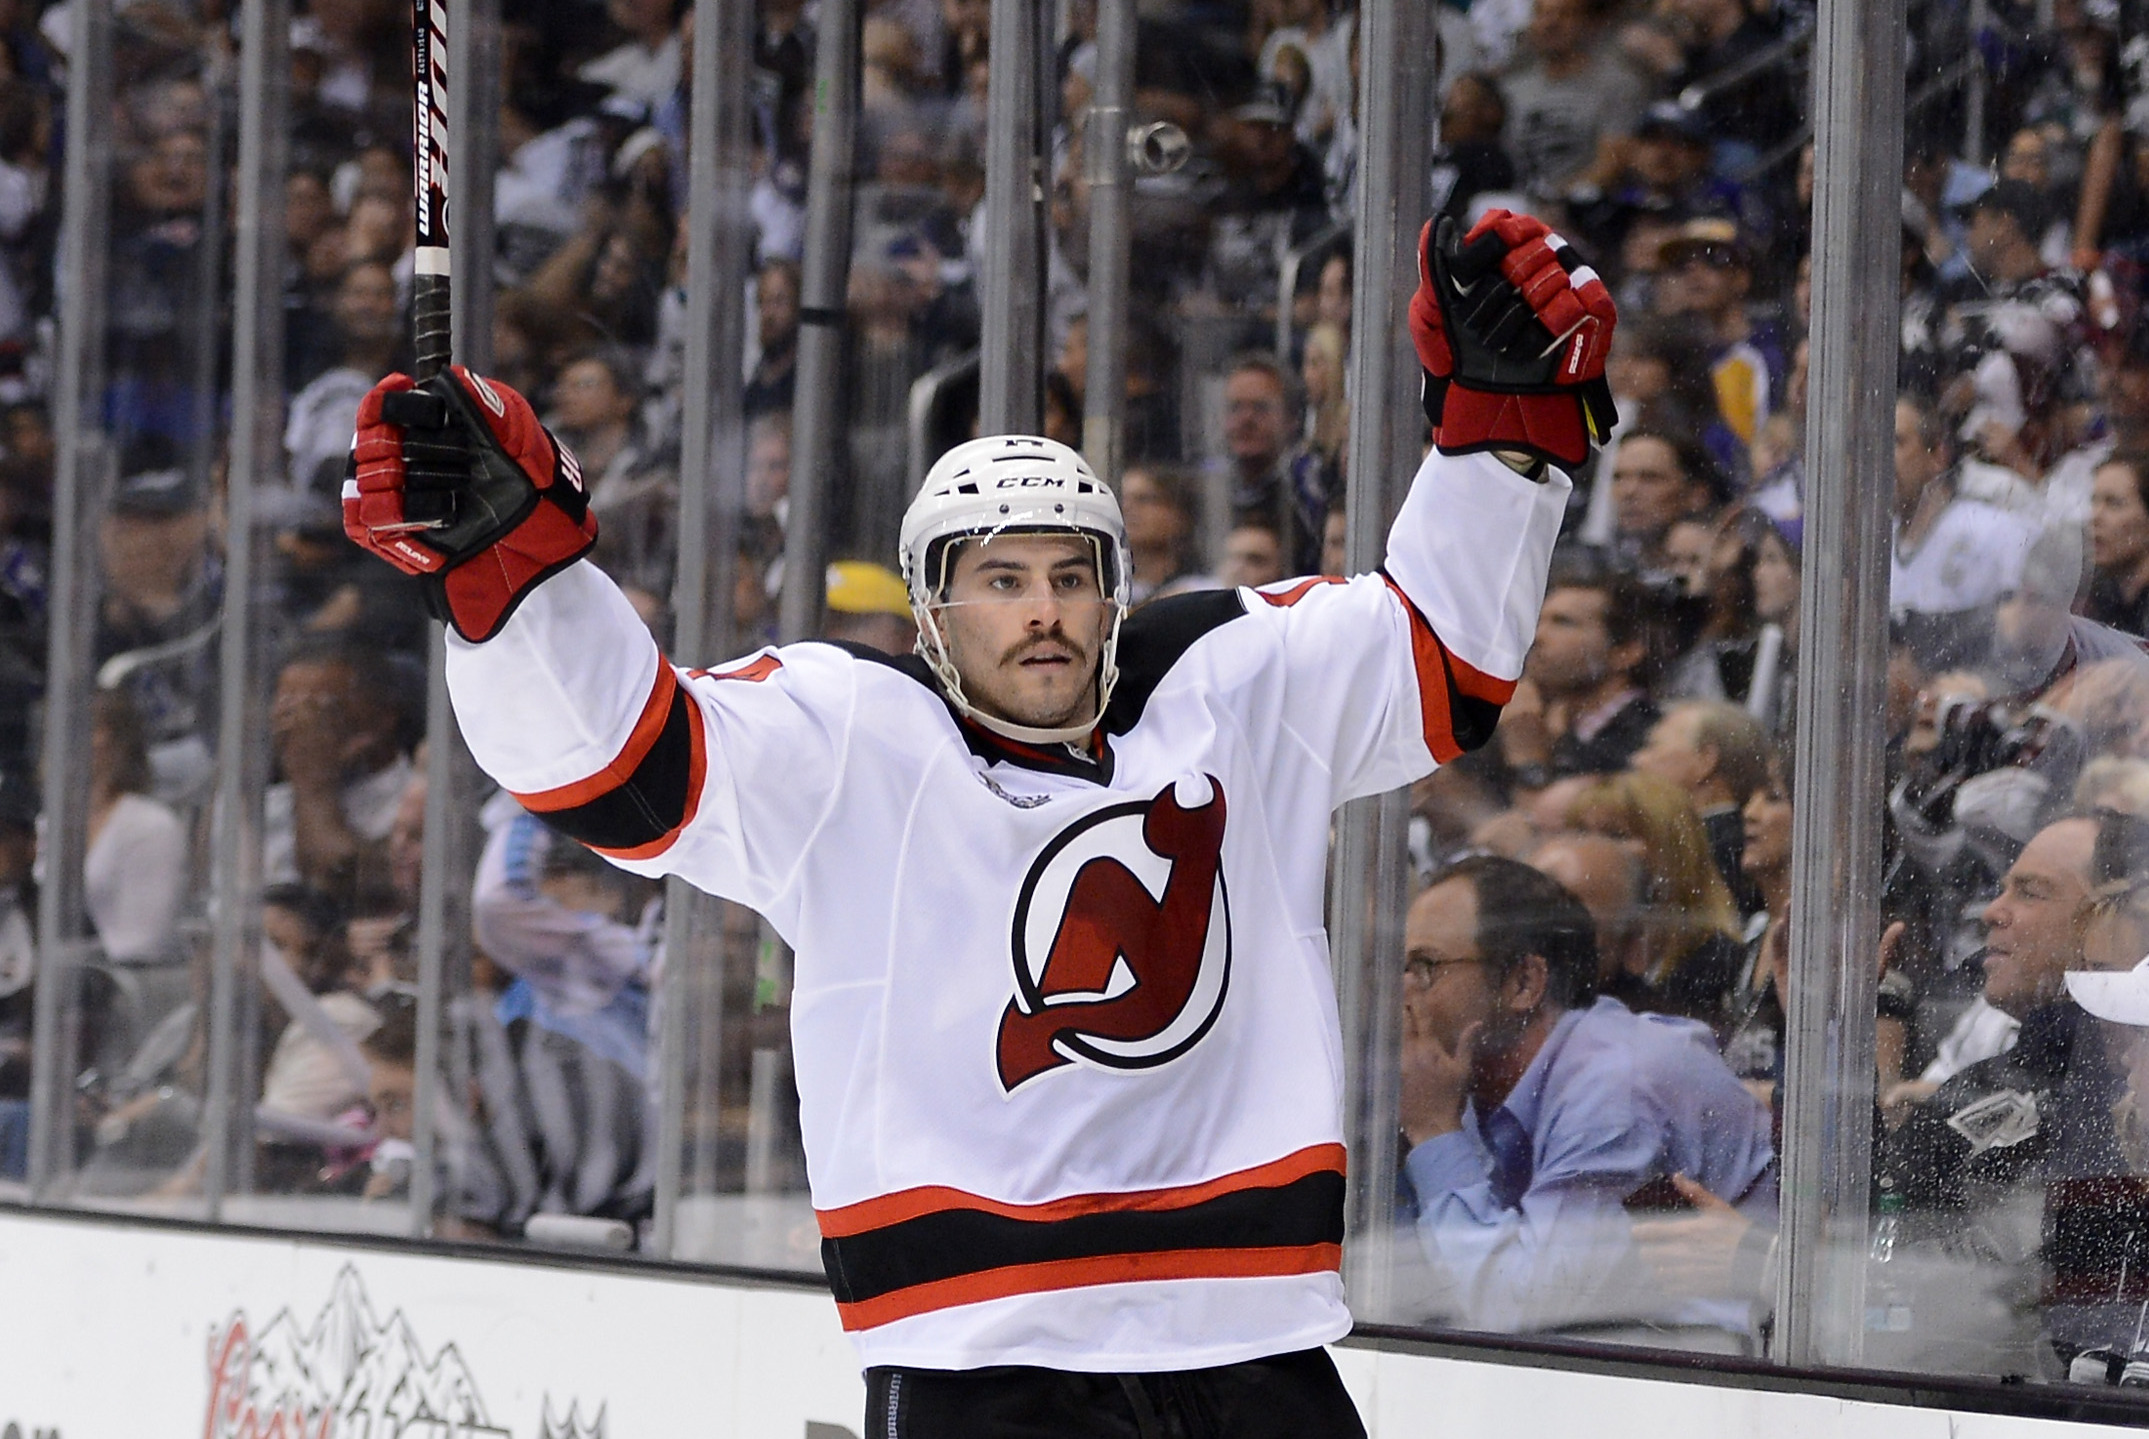 What If New Jersey Devils Had Scored Overtime Goals in 2012 Finals?